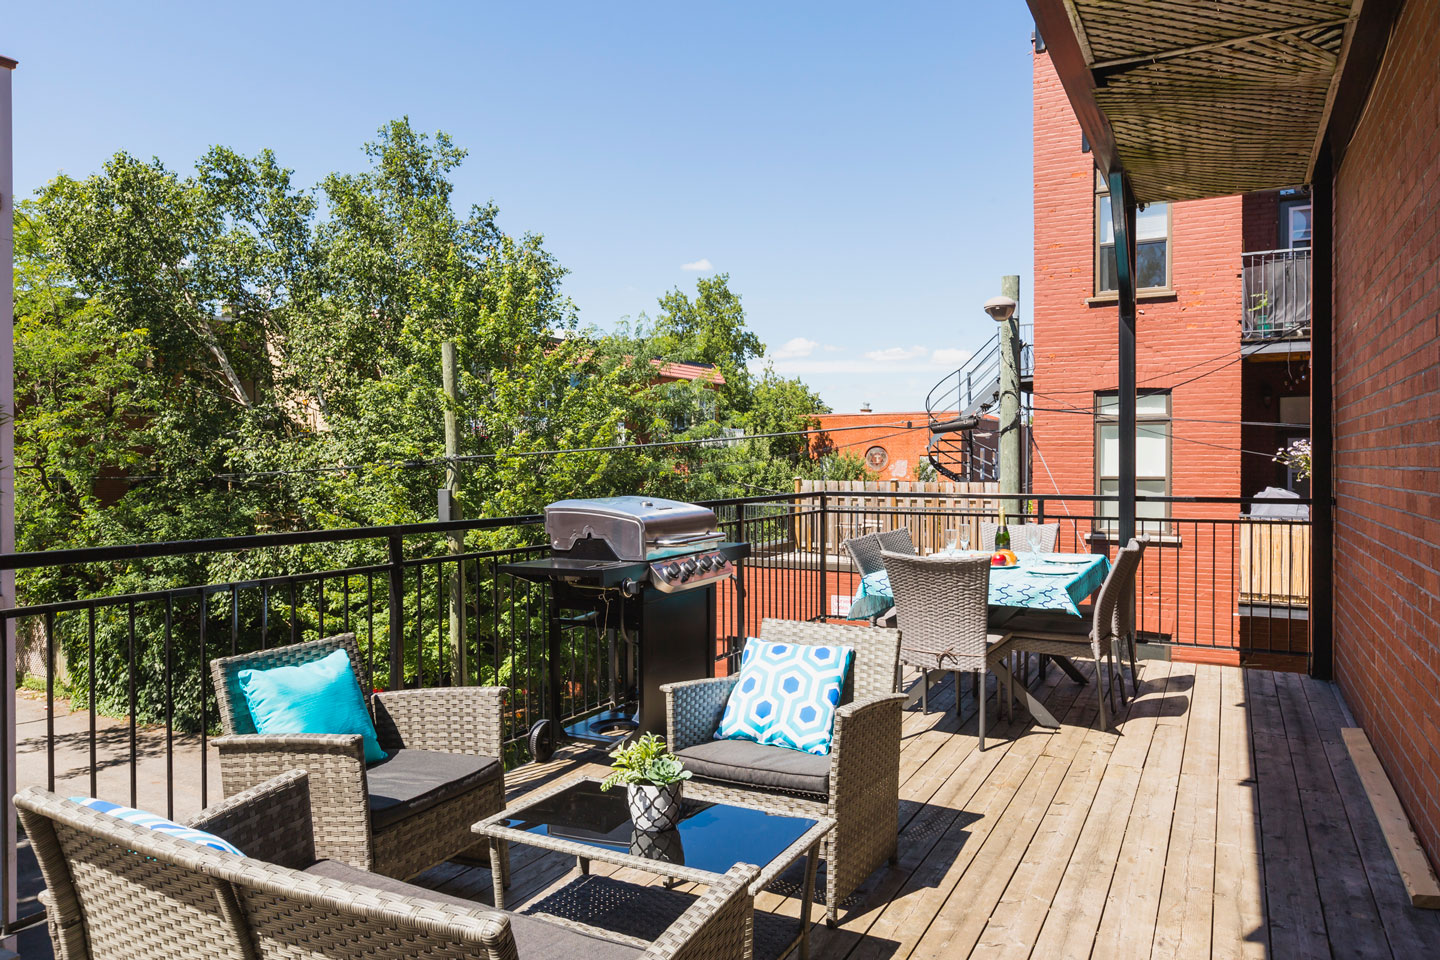 Chic Laurier #2: sunny private patio with BBQ with gas provided